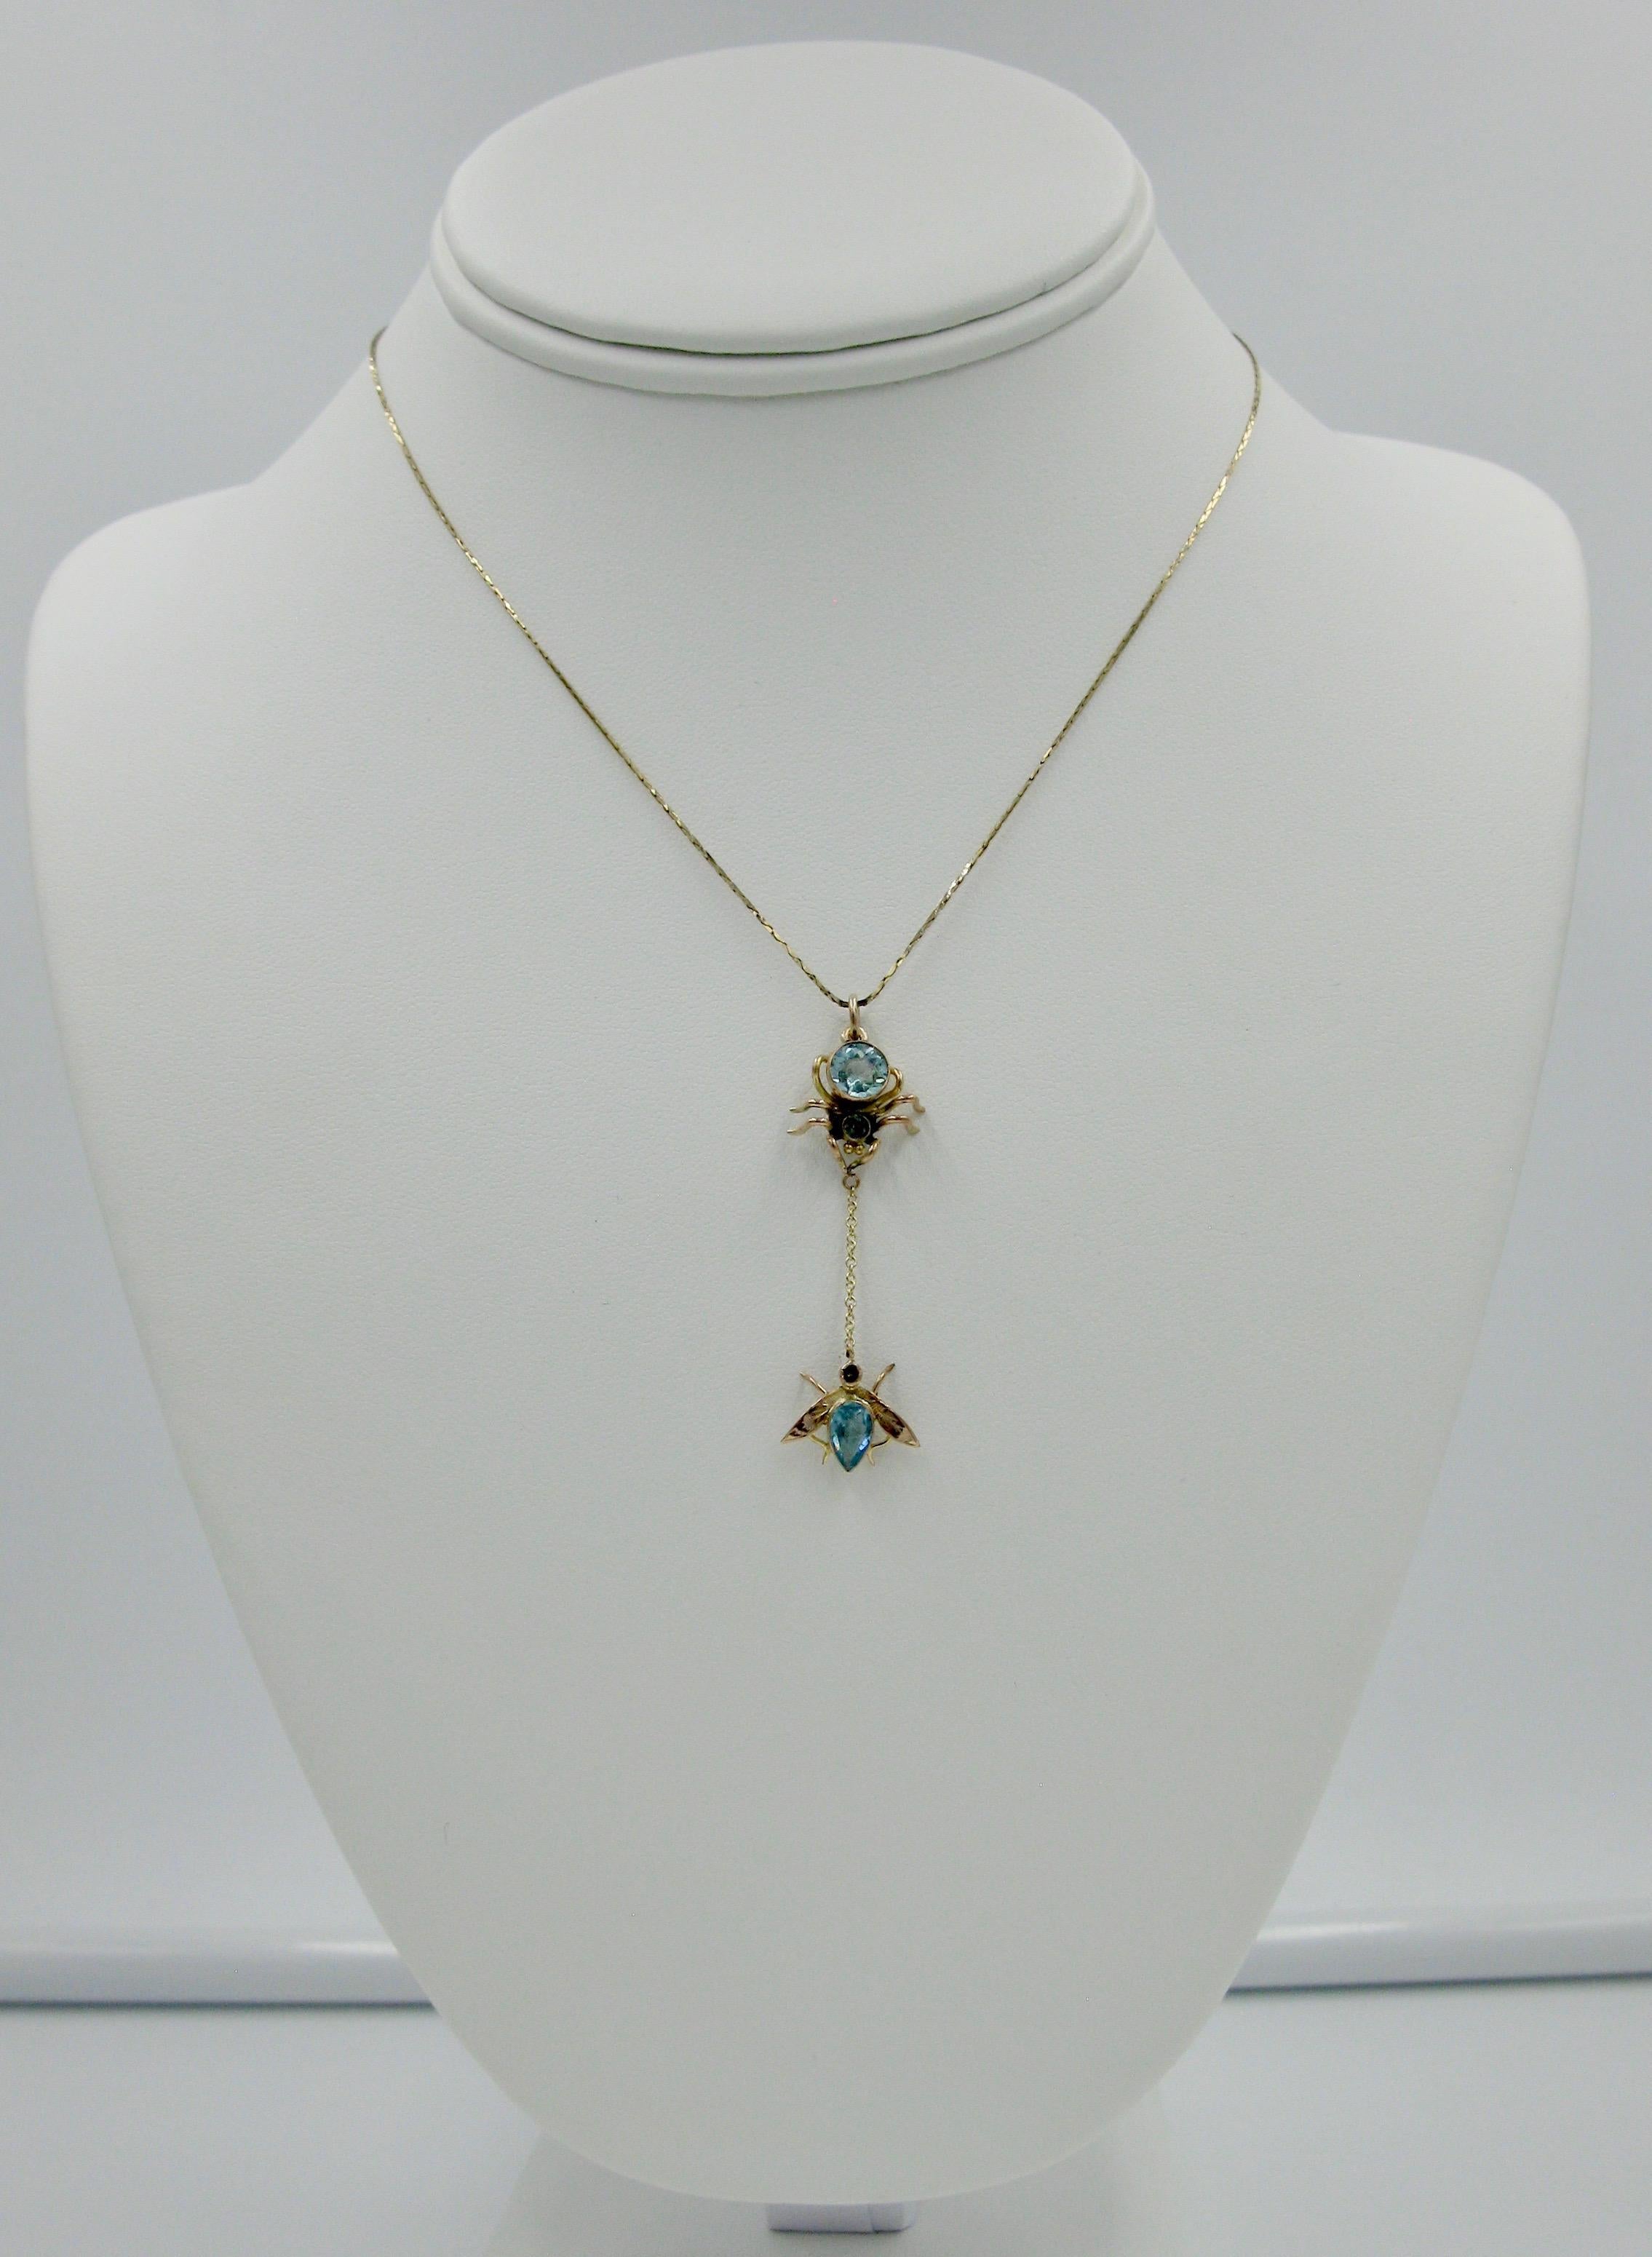 A wonderful Spider and Fly Pendant set with fine Blue Topaz gems!  The gorgeous spider is set with two round faceted Blue Topaz.  The fly is set with a faceted pear shape and round Blue Topaz.  The jewels are set in 9 Carat Gold.  The spider and fly